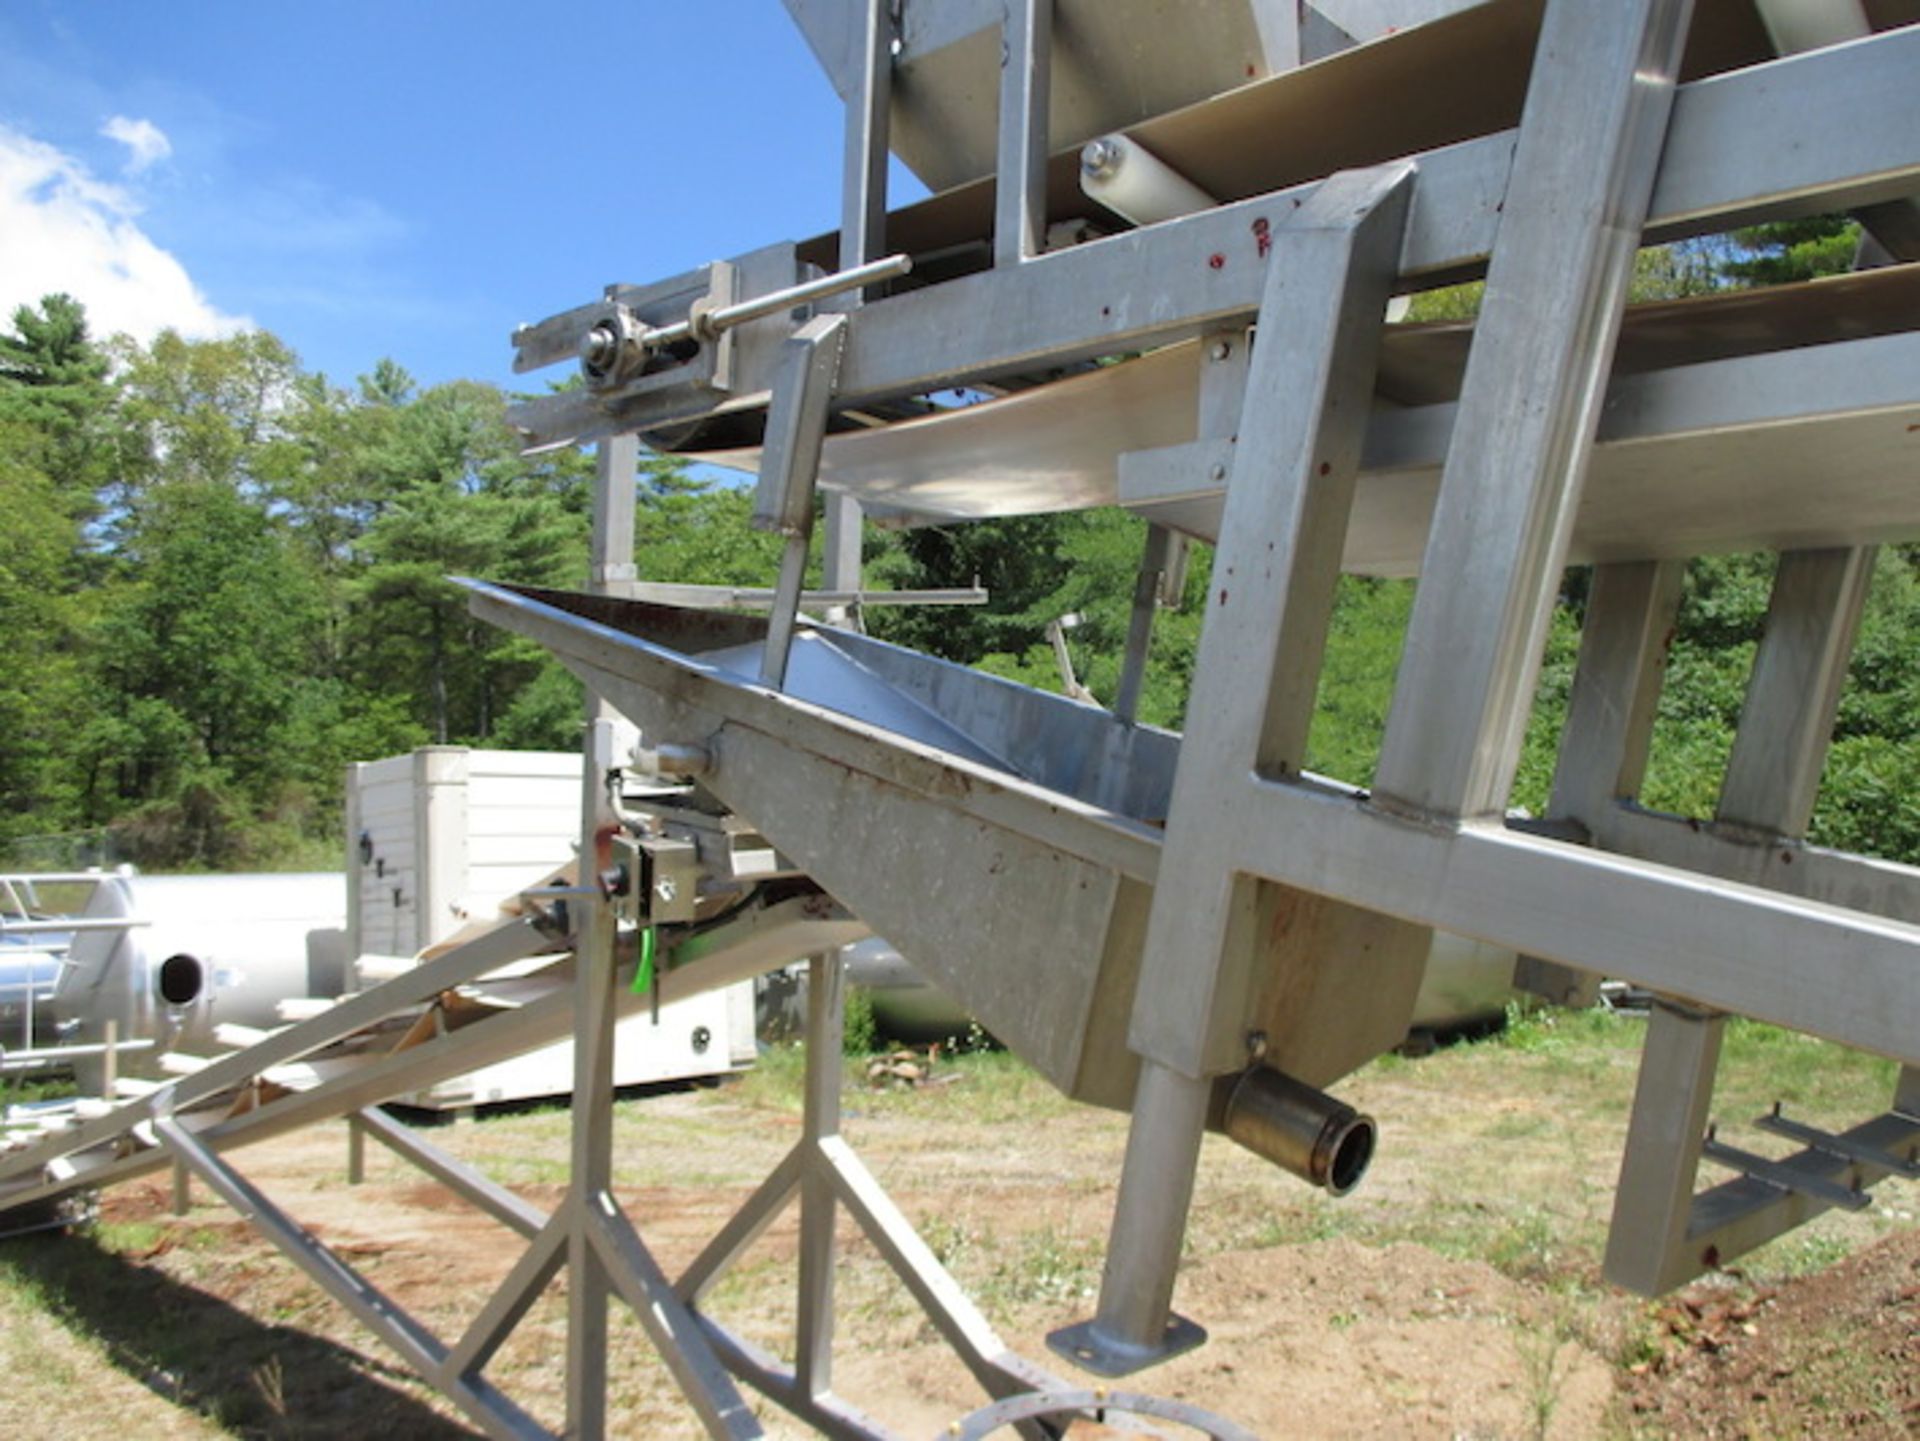 PPM Technologies Stainless Steel Incline Conveyor no Drive, 18? Wide Belt, Conveyor is Approx 53? in - Image 4 of 5